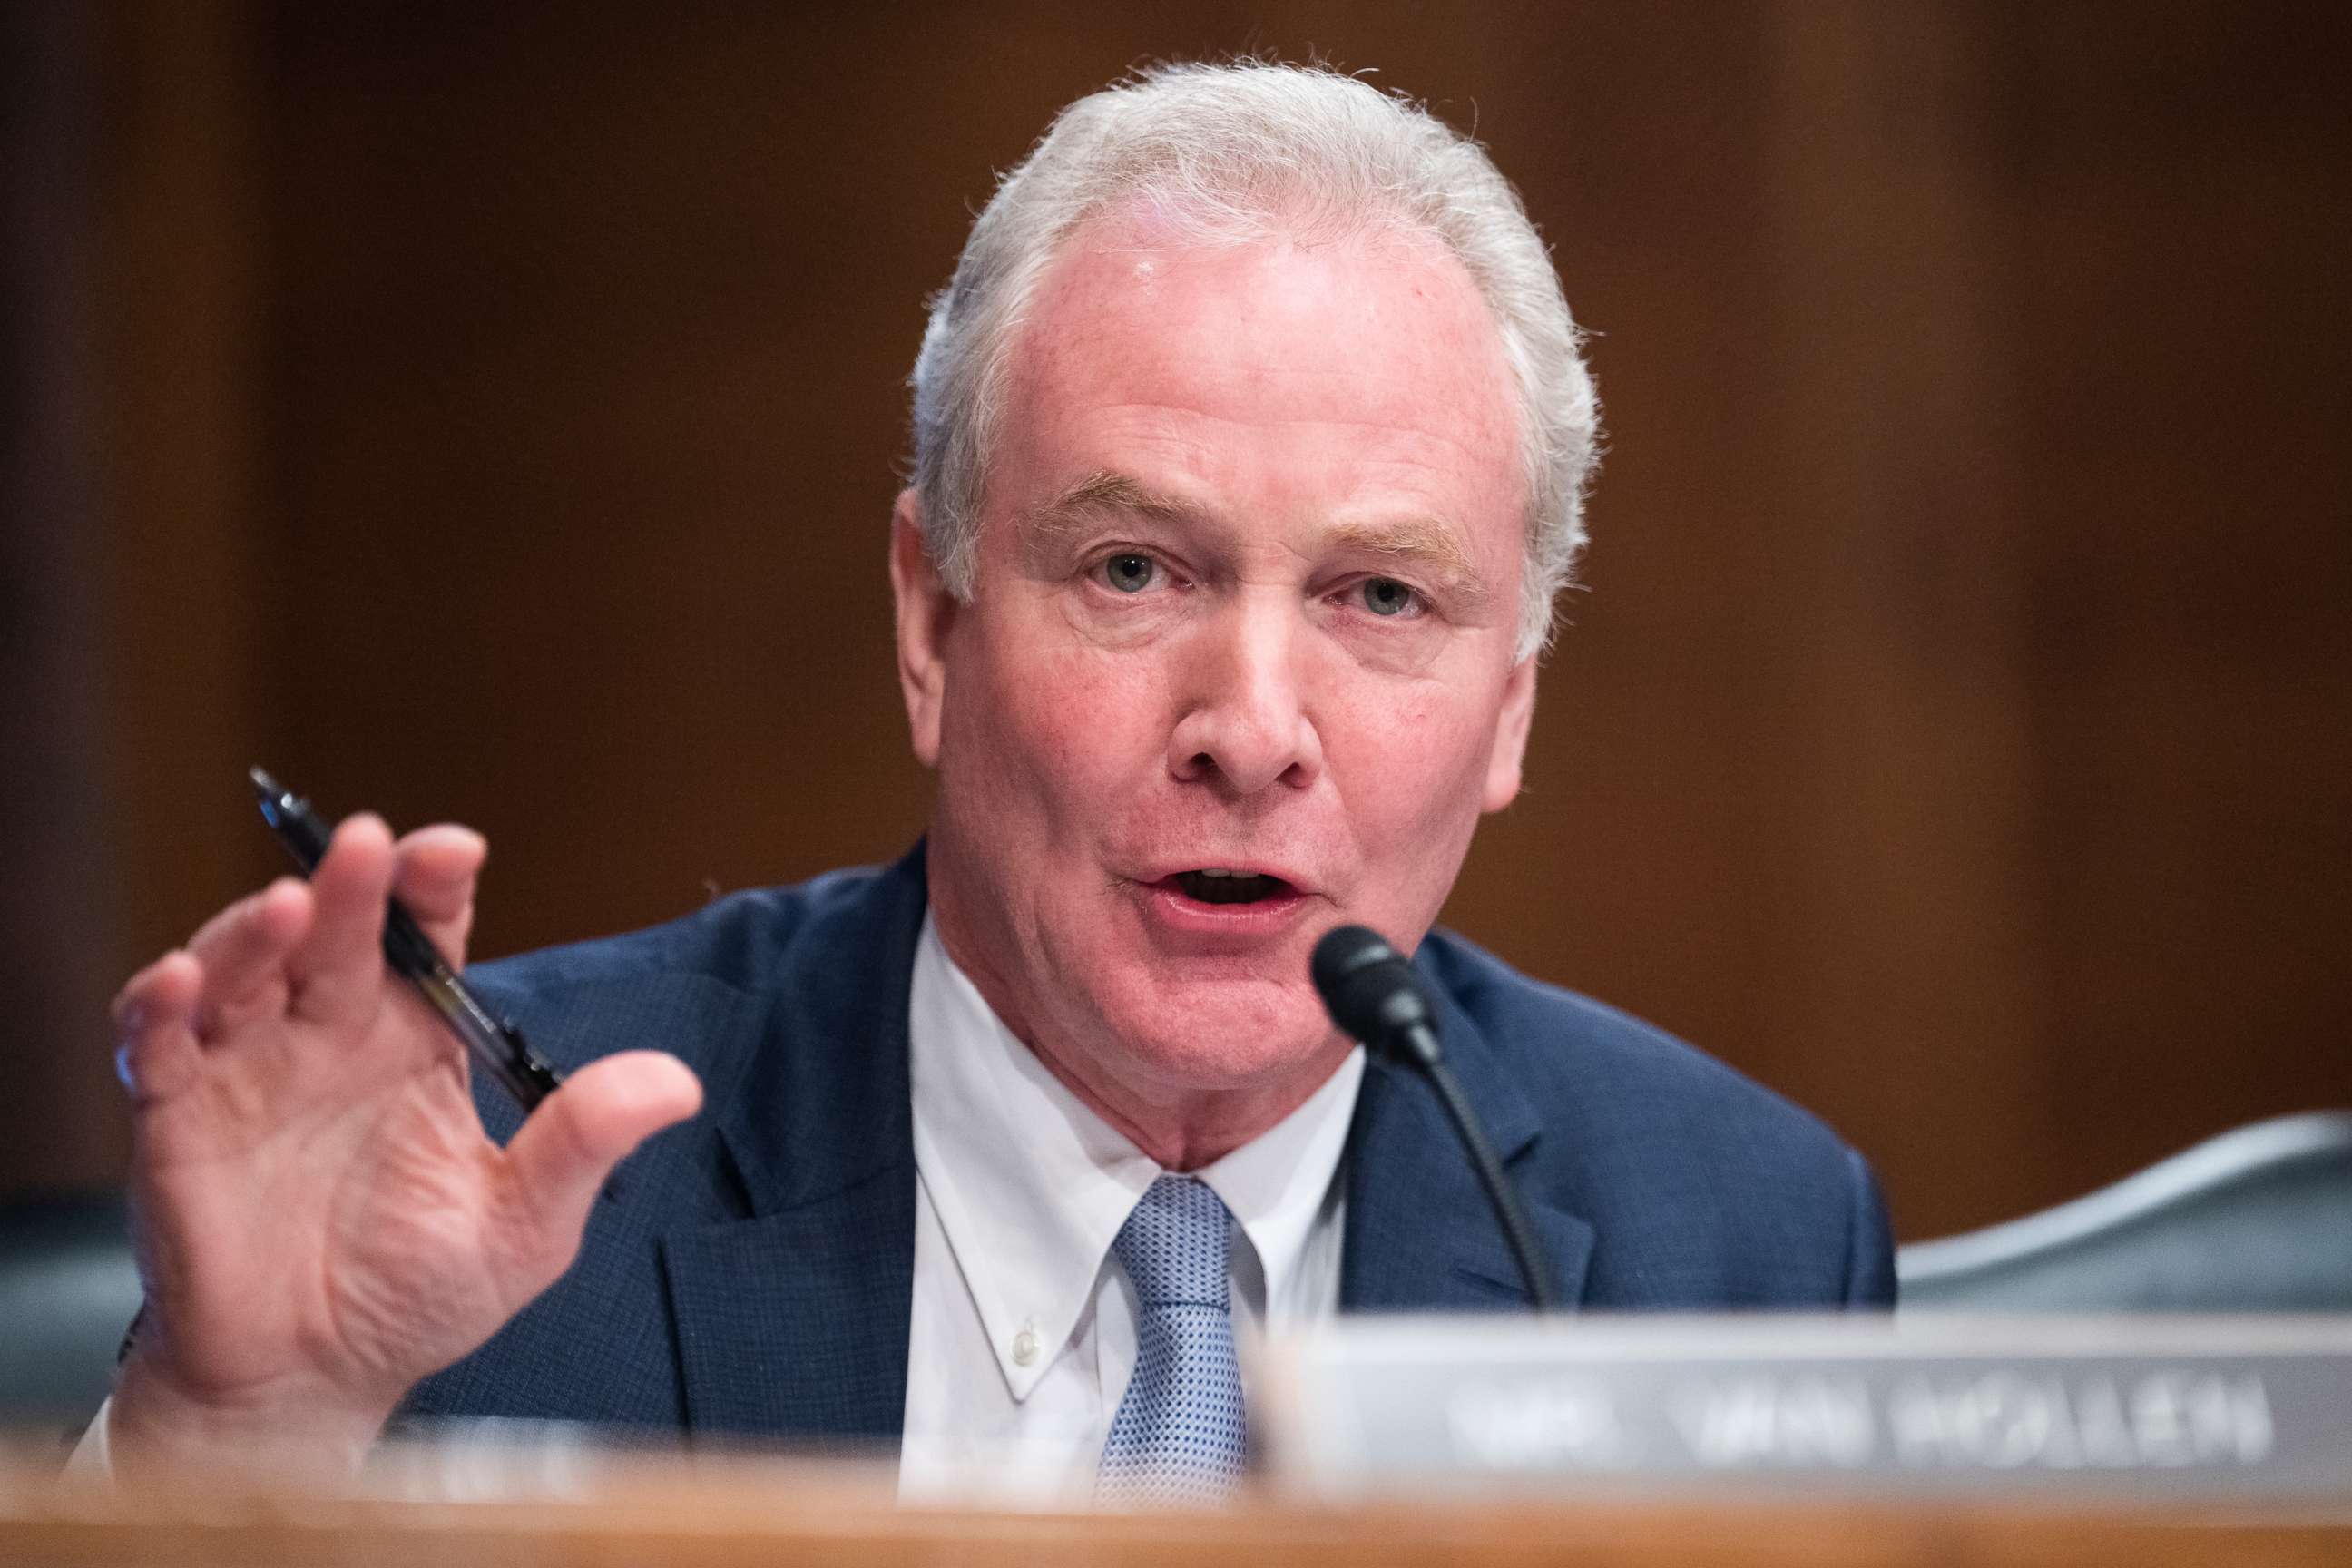 PHOTO: Sen. Chris Van Hollen, D-Md., questions Treasury Secretary Janet Yellen during a Senate Banking, Housing, and Urban Affairs Committee hearing on May 10, 2022 in Washington, DC.